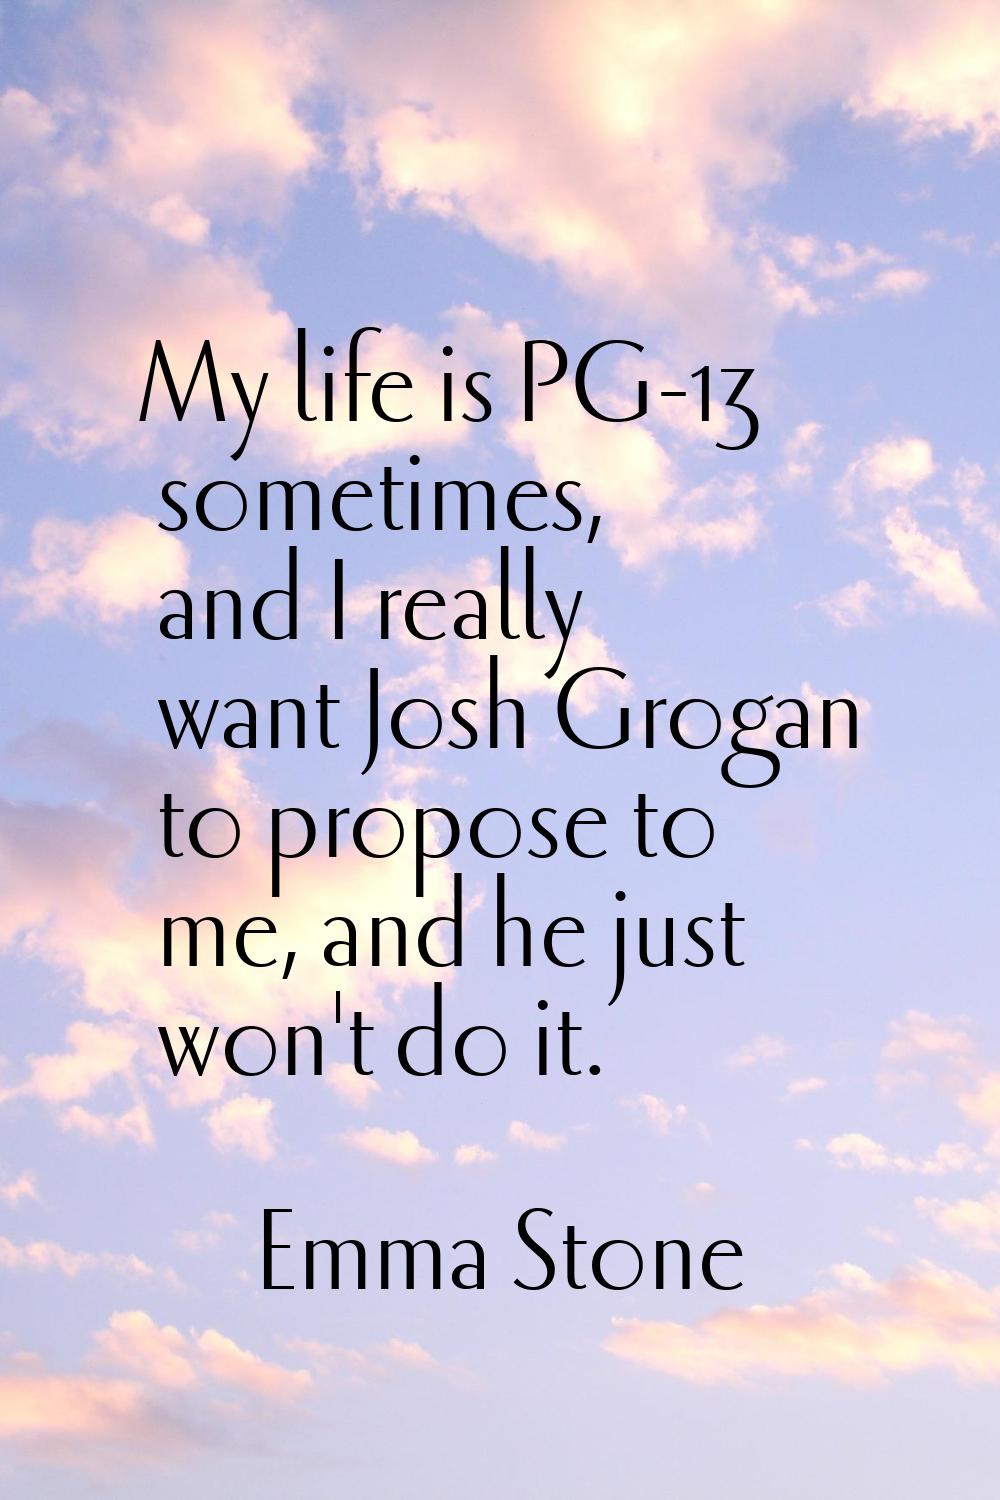 My life is PG-13 sometimes, and I really want Josh Grogan to propose to me, and he just won't do it